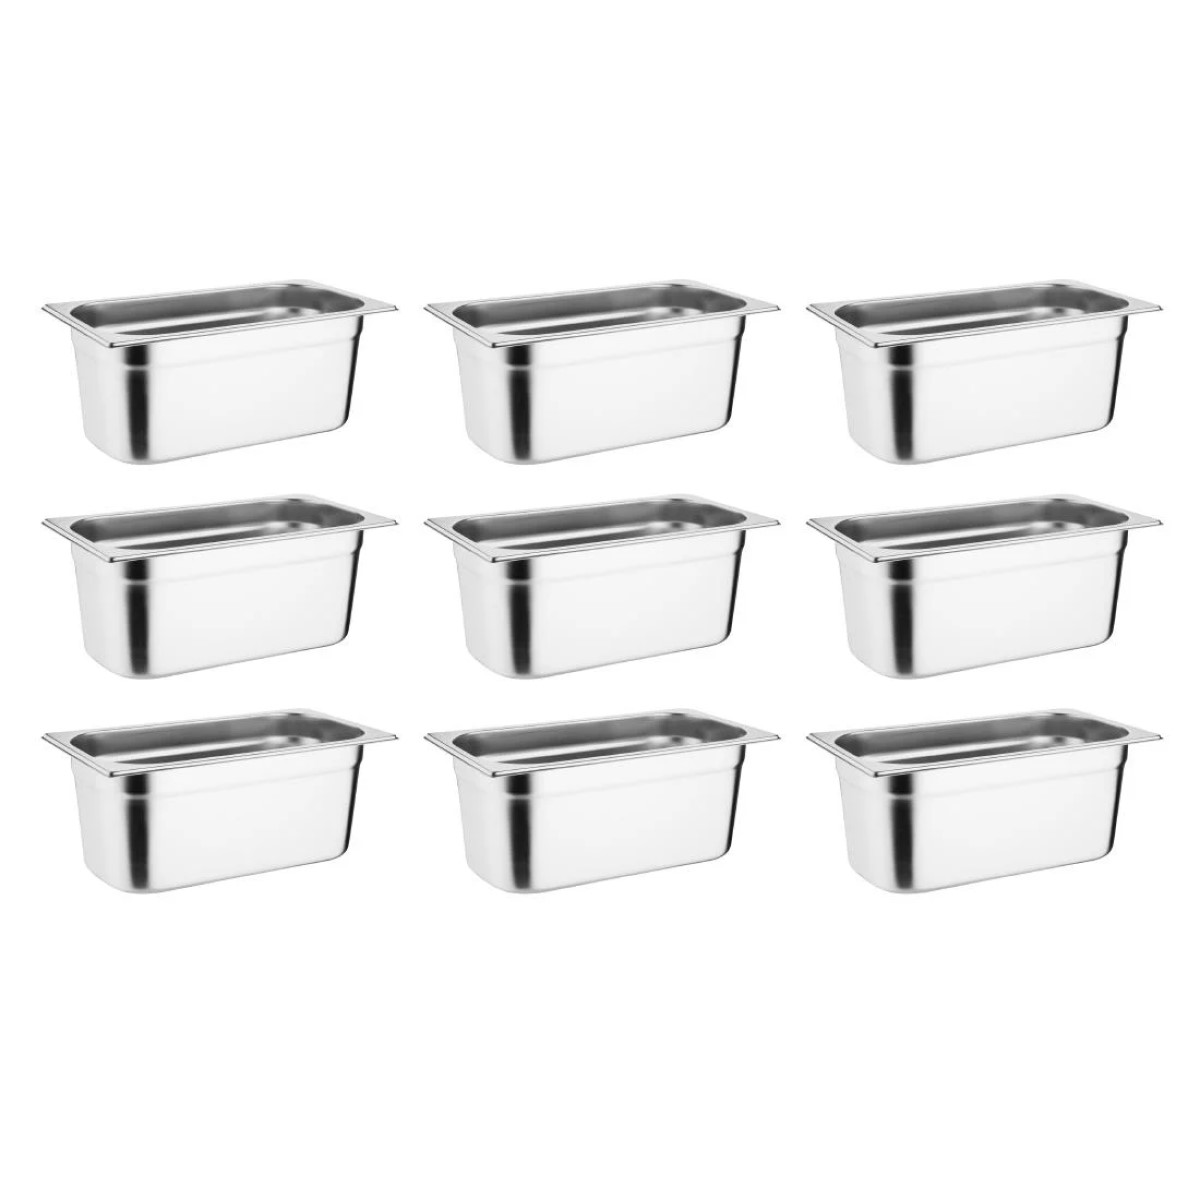 Vogue Stainless Steel Gastronorm Pan Set 9 x 1/3 - S729